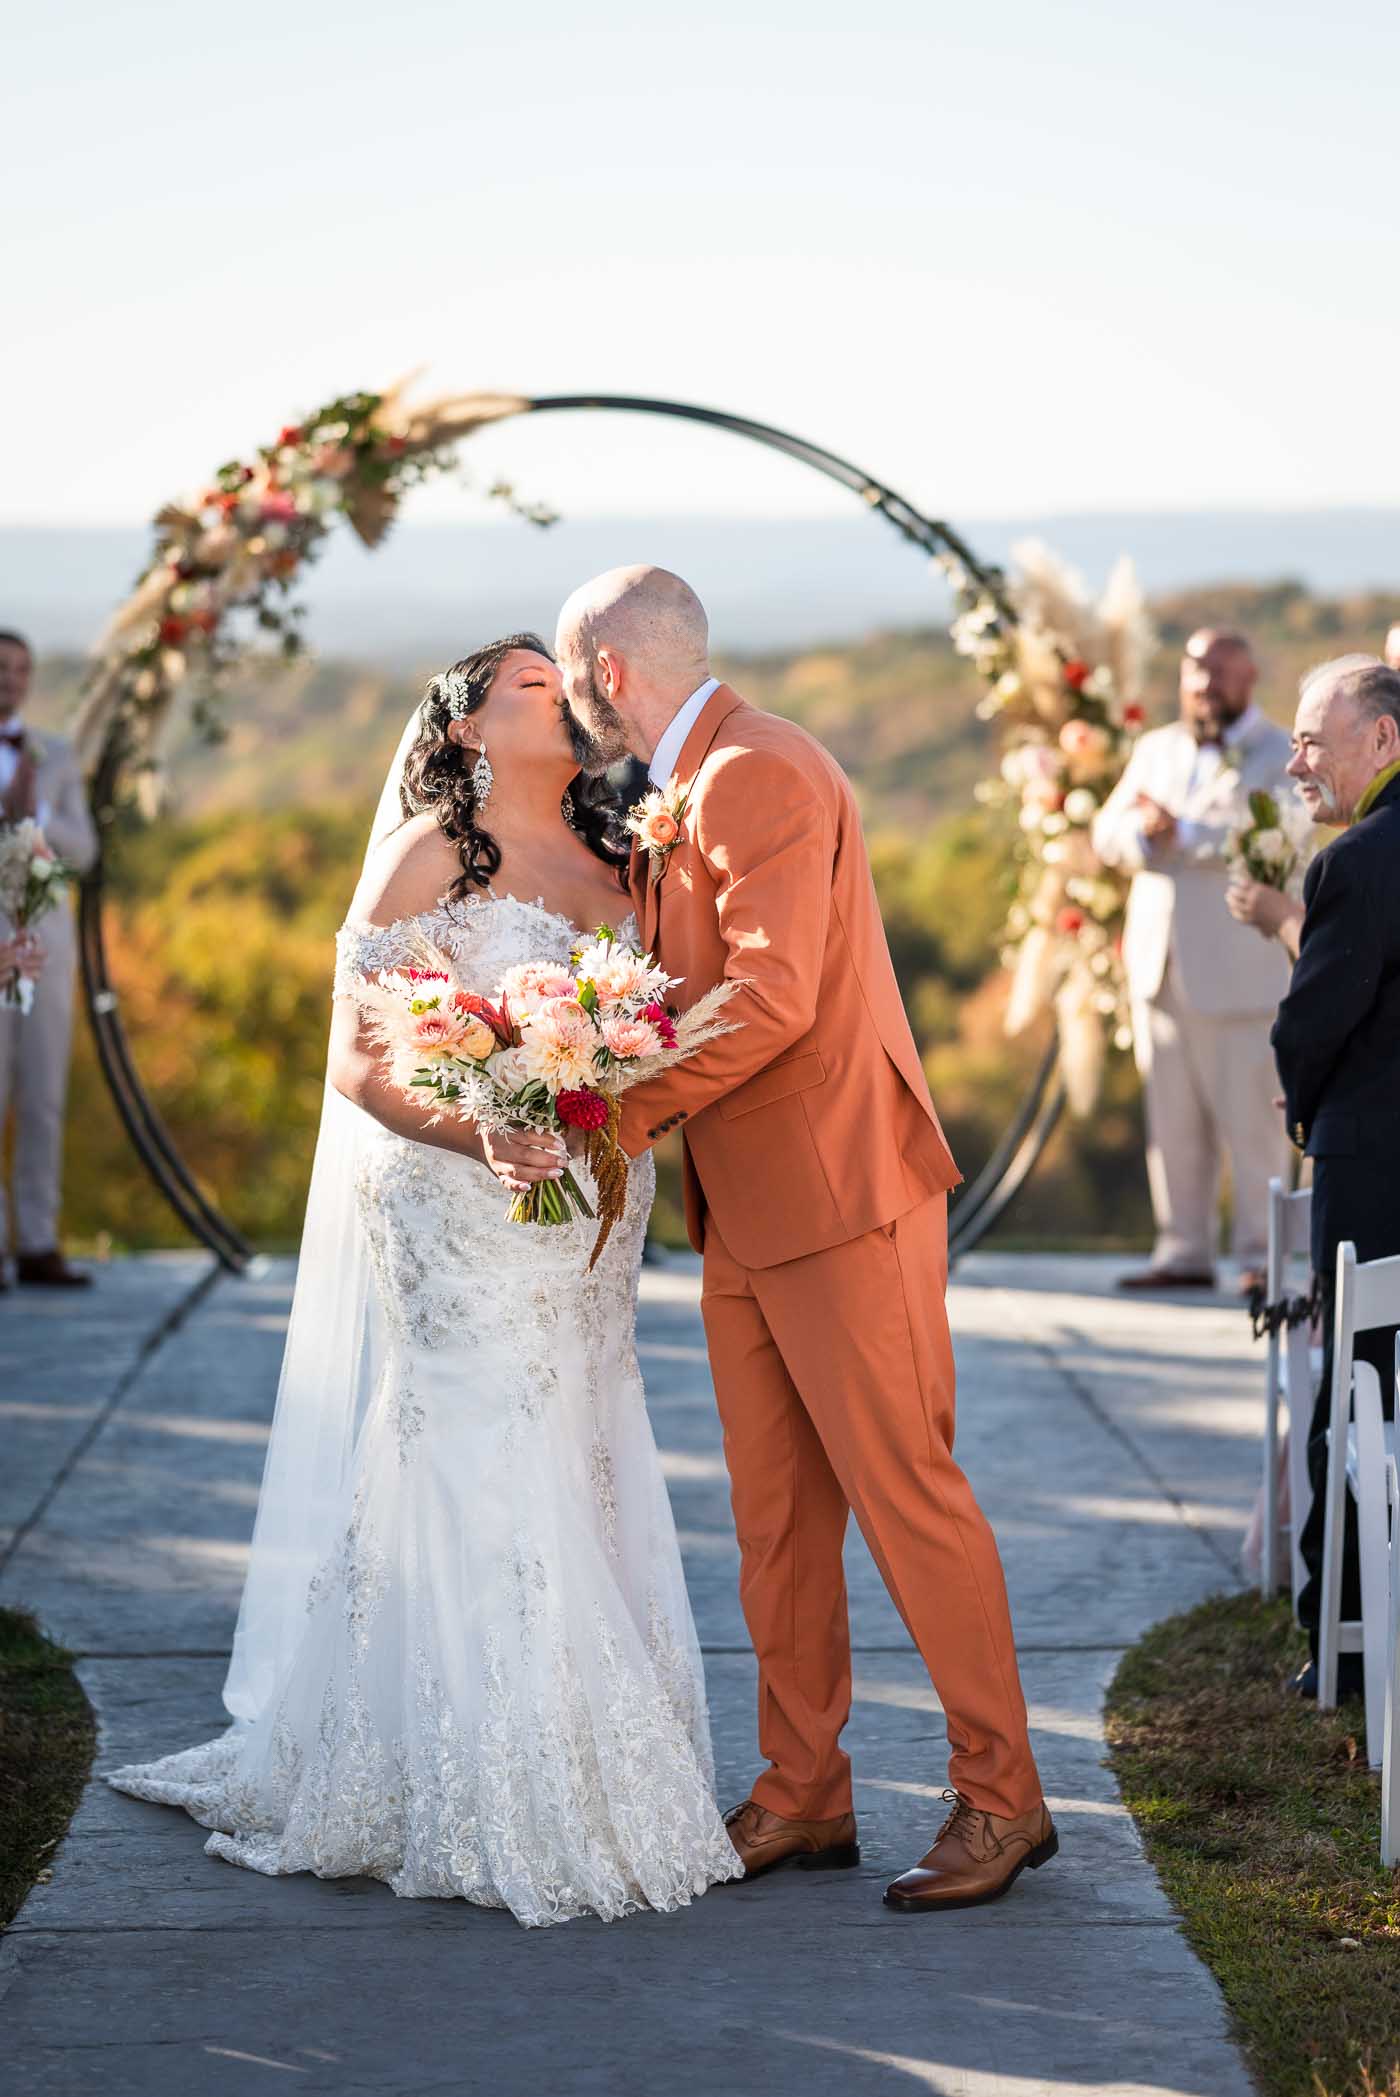 Groom kisses bride as they walk back down the aisle